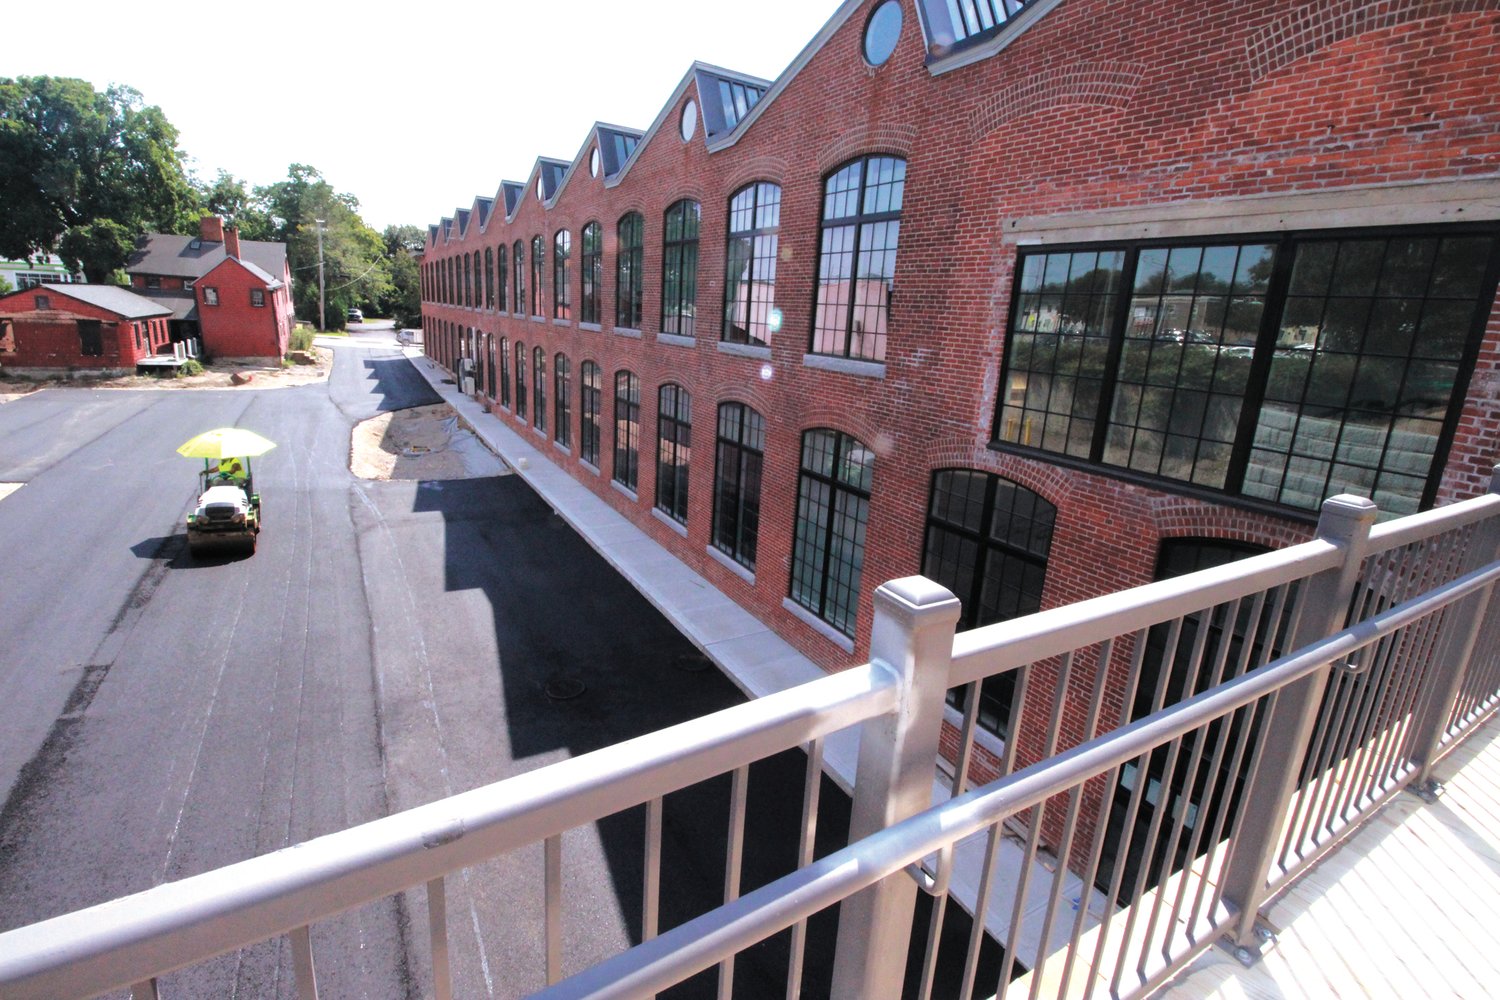 INTO THE JAWS OF THE SAW TOOTH:  A pedestrian bridge provides easy access to the second floor City Hall annex offices at the Saw Tooth Building in Apponaug.